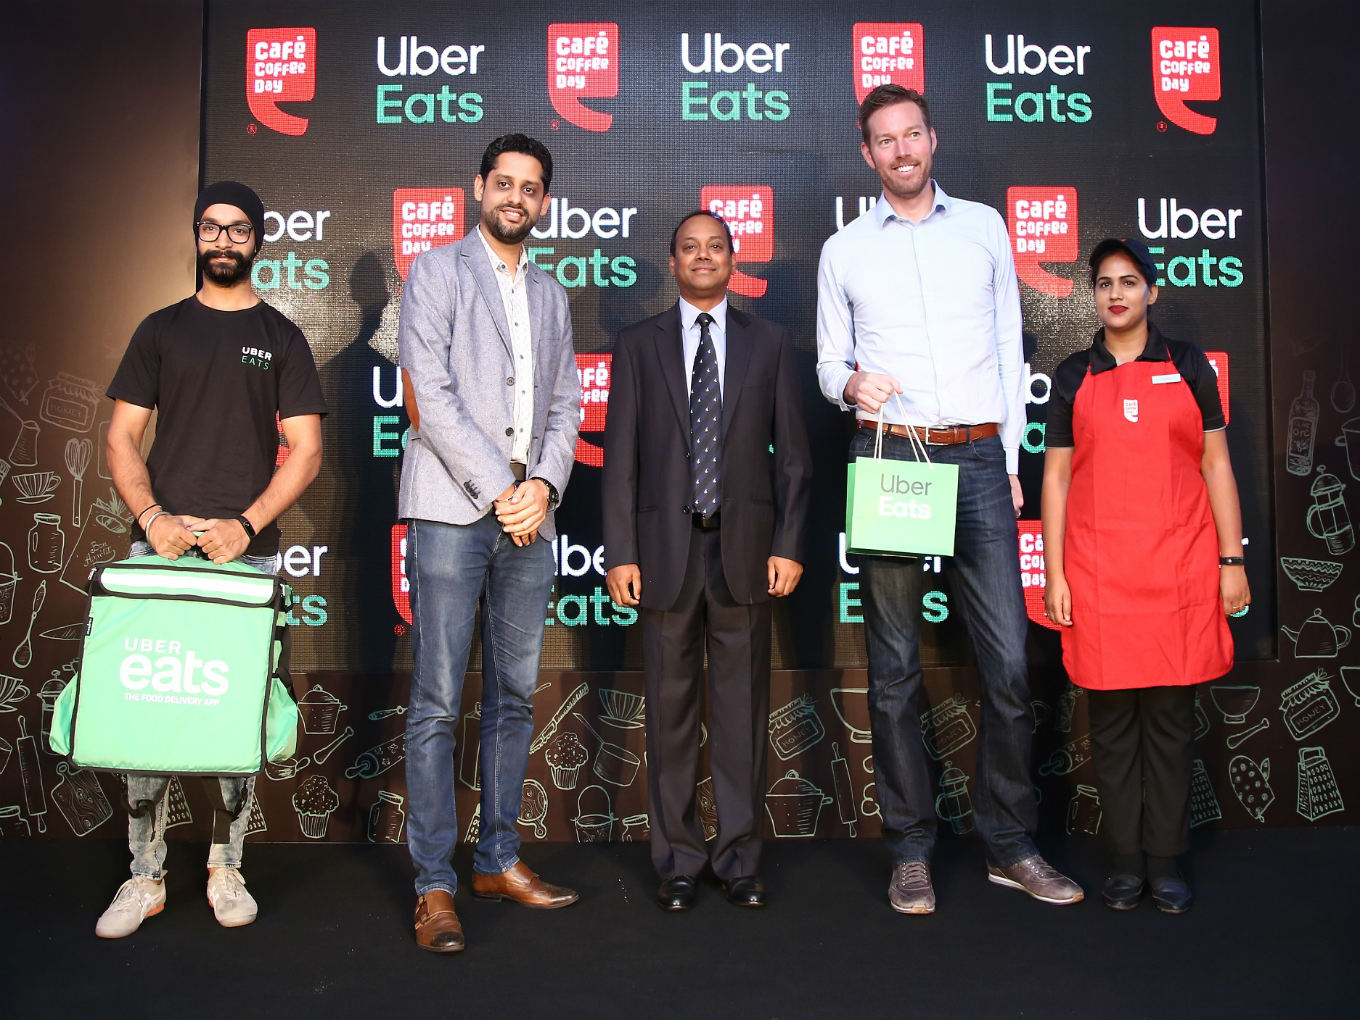 Uber Eats & Cafe Coffee Day To Bring Flavors From Around The World Through Virtual Restaurant